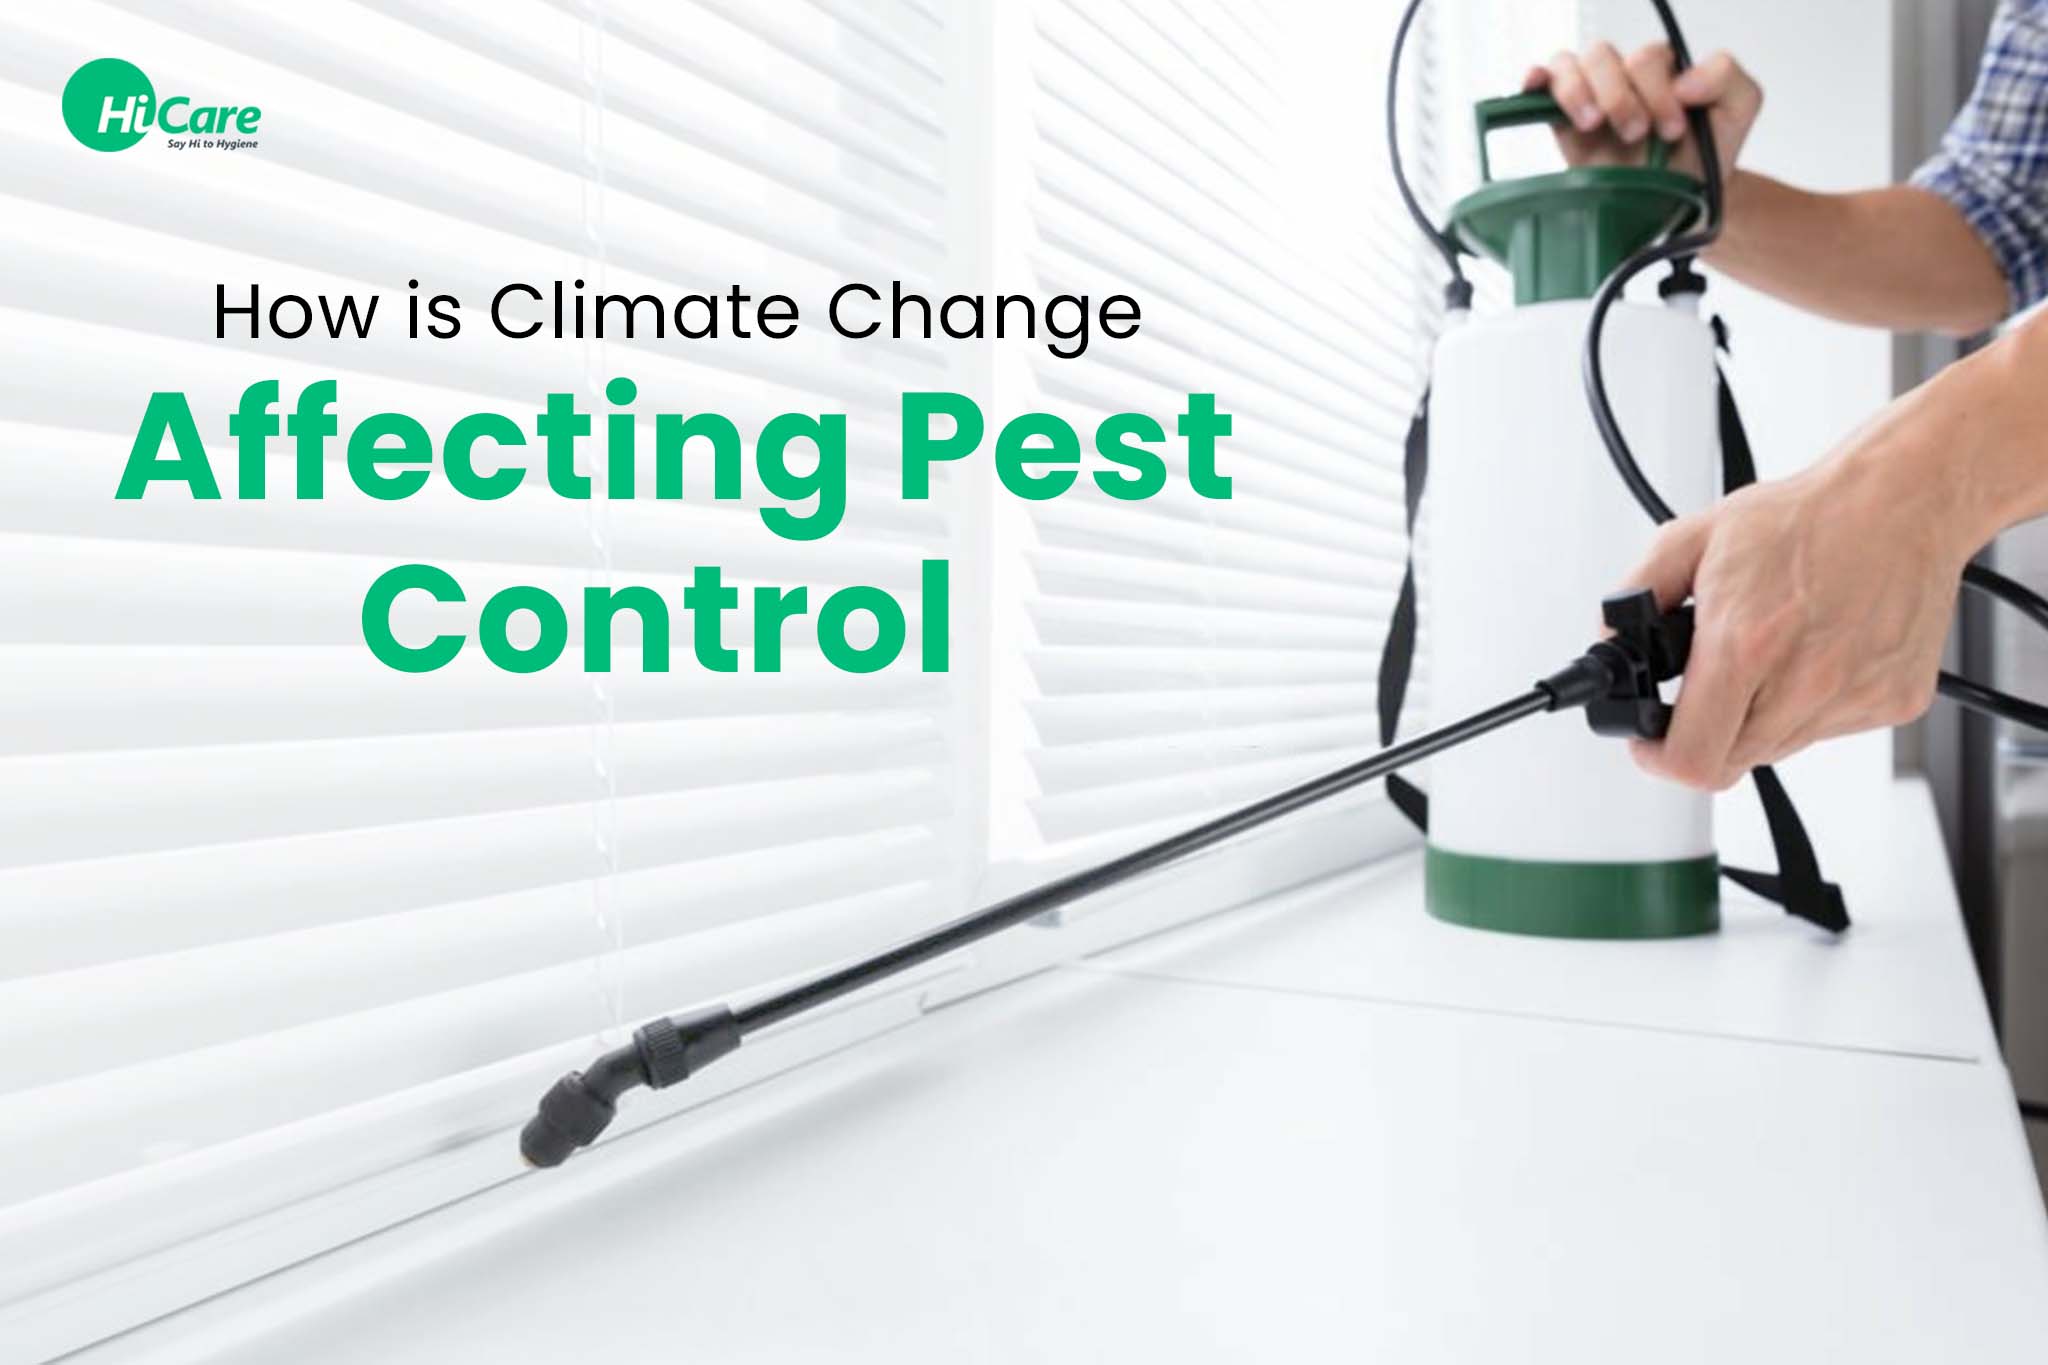 How is Climate Change Affecting Pest Control?